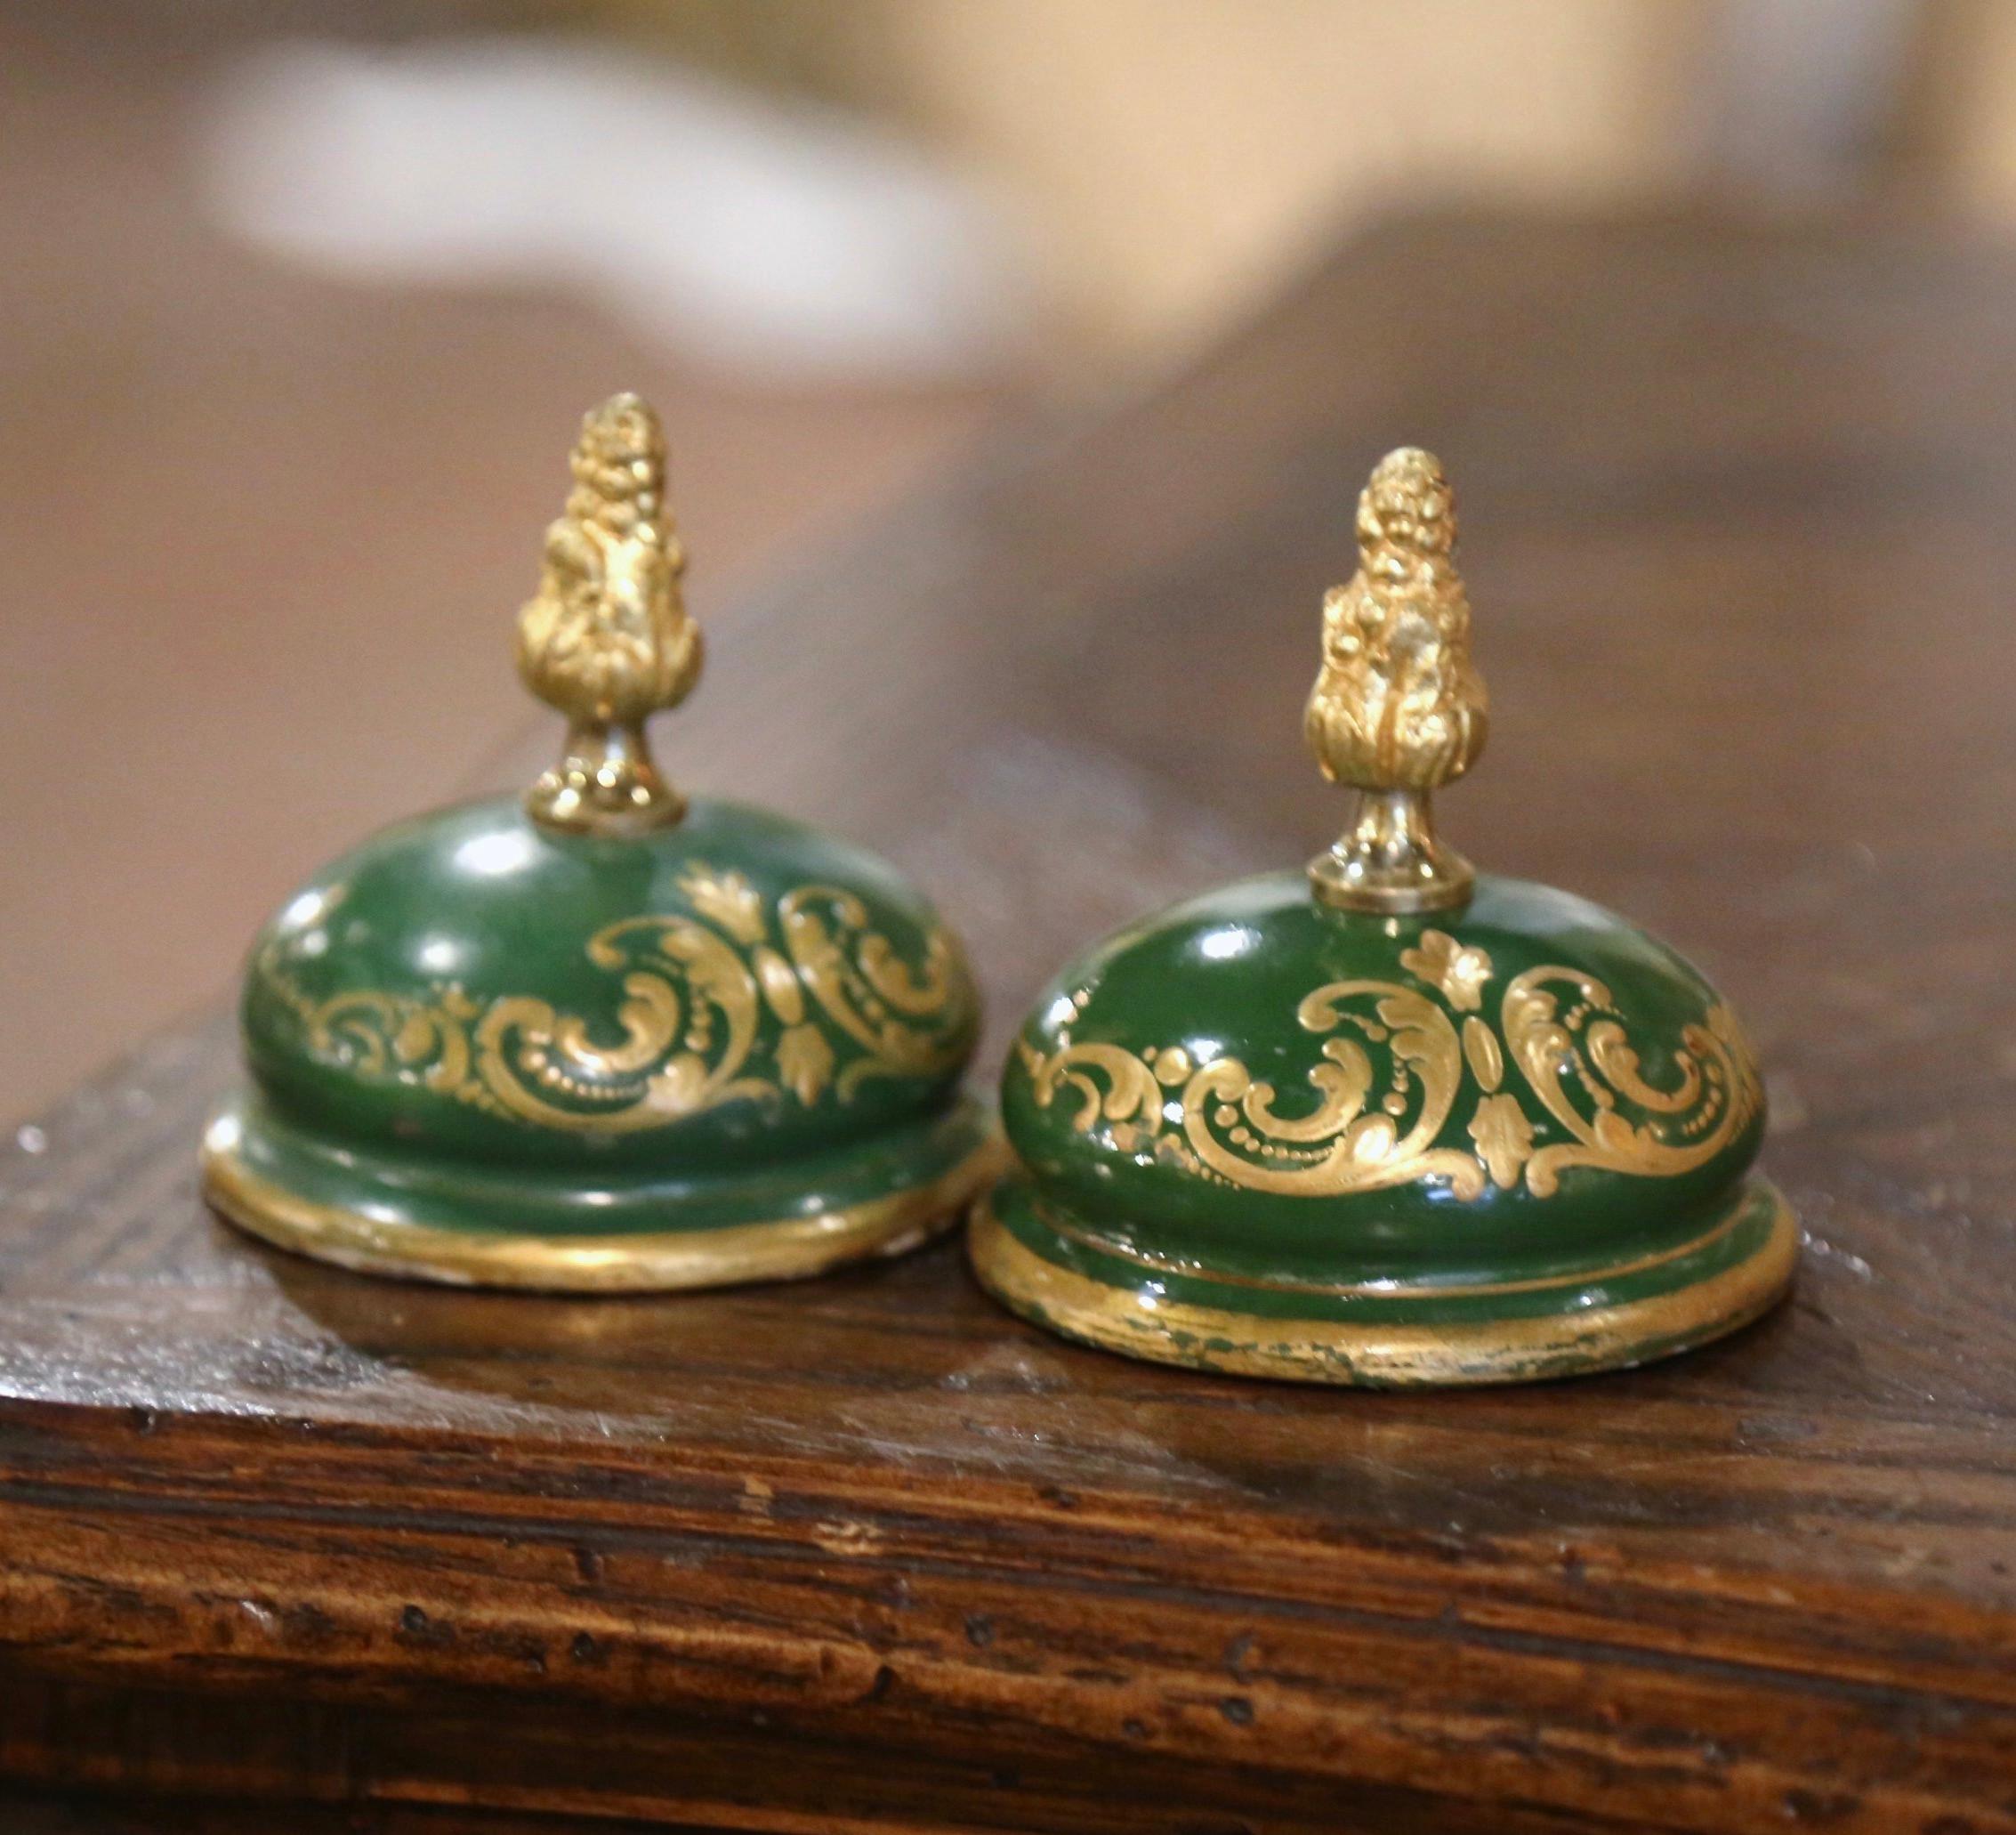 Pair of 19th Century French Sevres Gilt Metal and Painted Porcelain Covered Urns For Sale 13